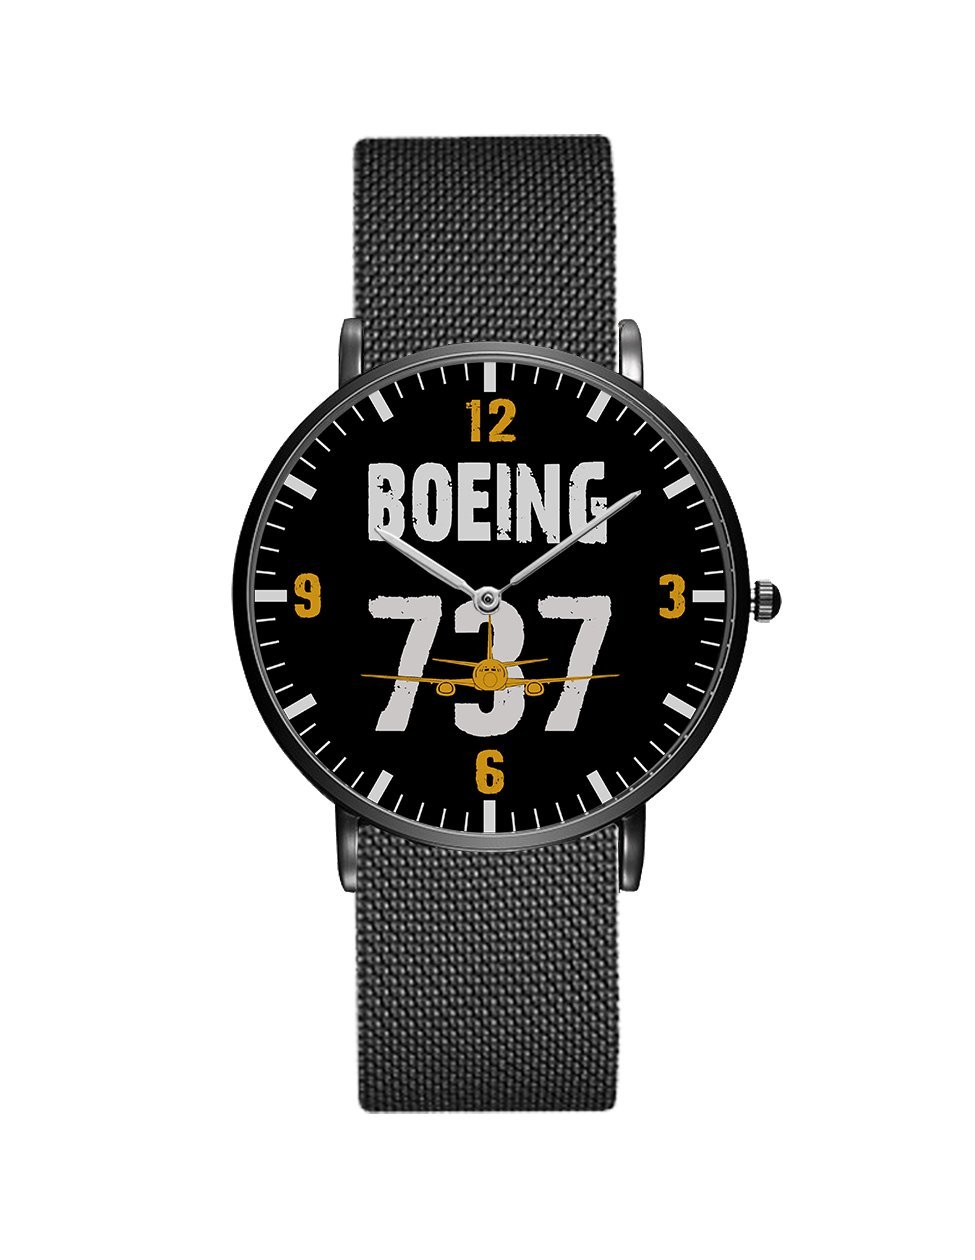 Boeing 737 Designed Stainless Steel Strap Watches Pilot Eyes Store Black & Stainless Steel Strap 